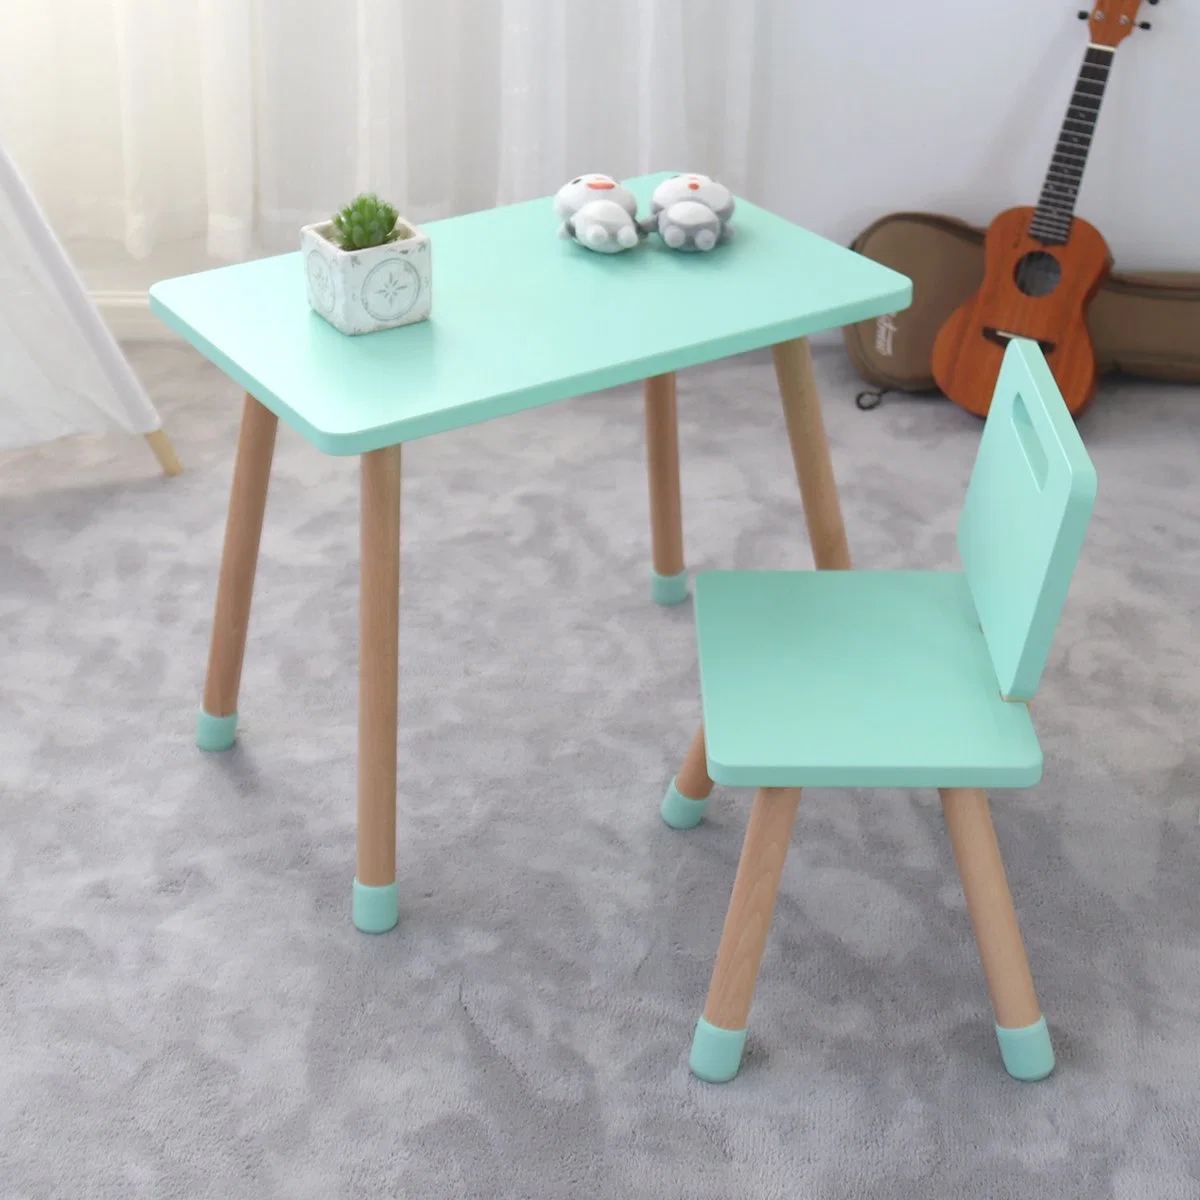 Wholesale/Supplier Preschool Kids Children Furniture Sets Study Table and Chairs Set for Kids